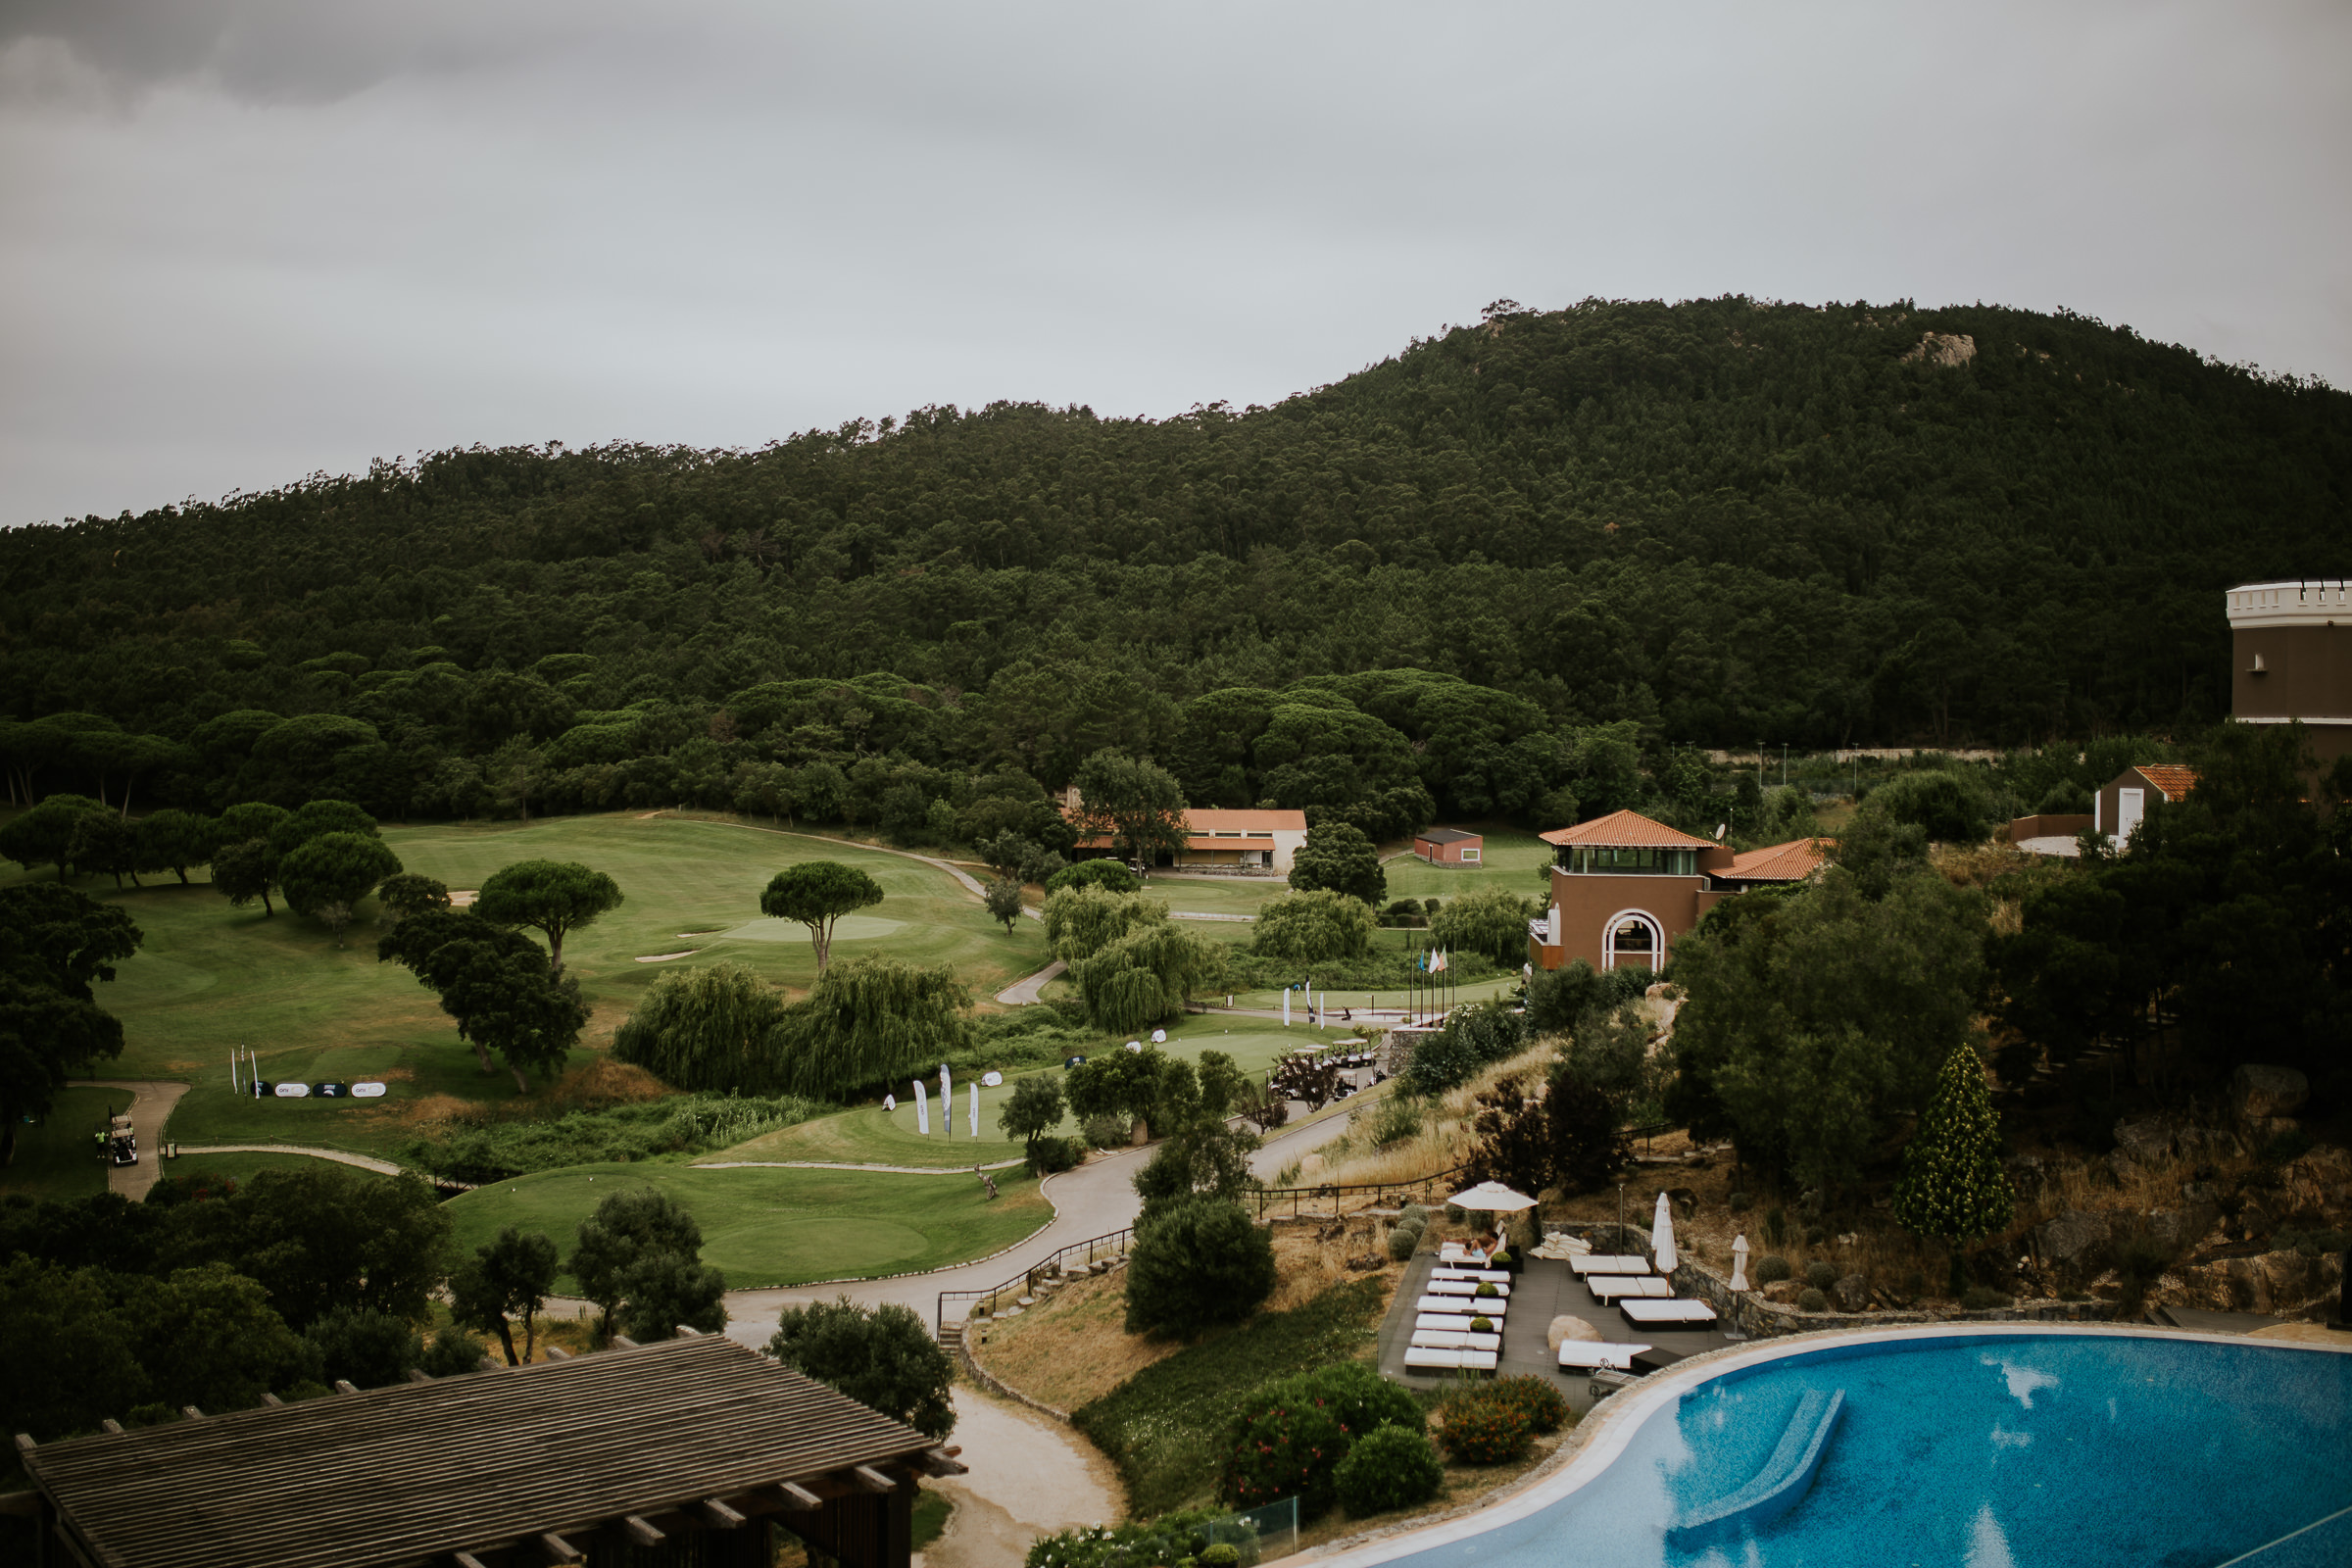 Landscape of a golf resort in Portugal surrounded by a forest